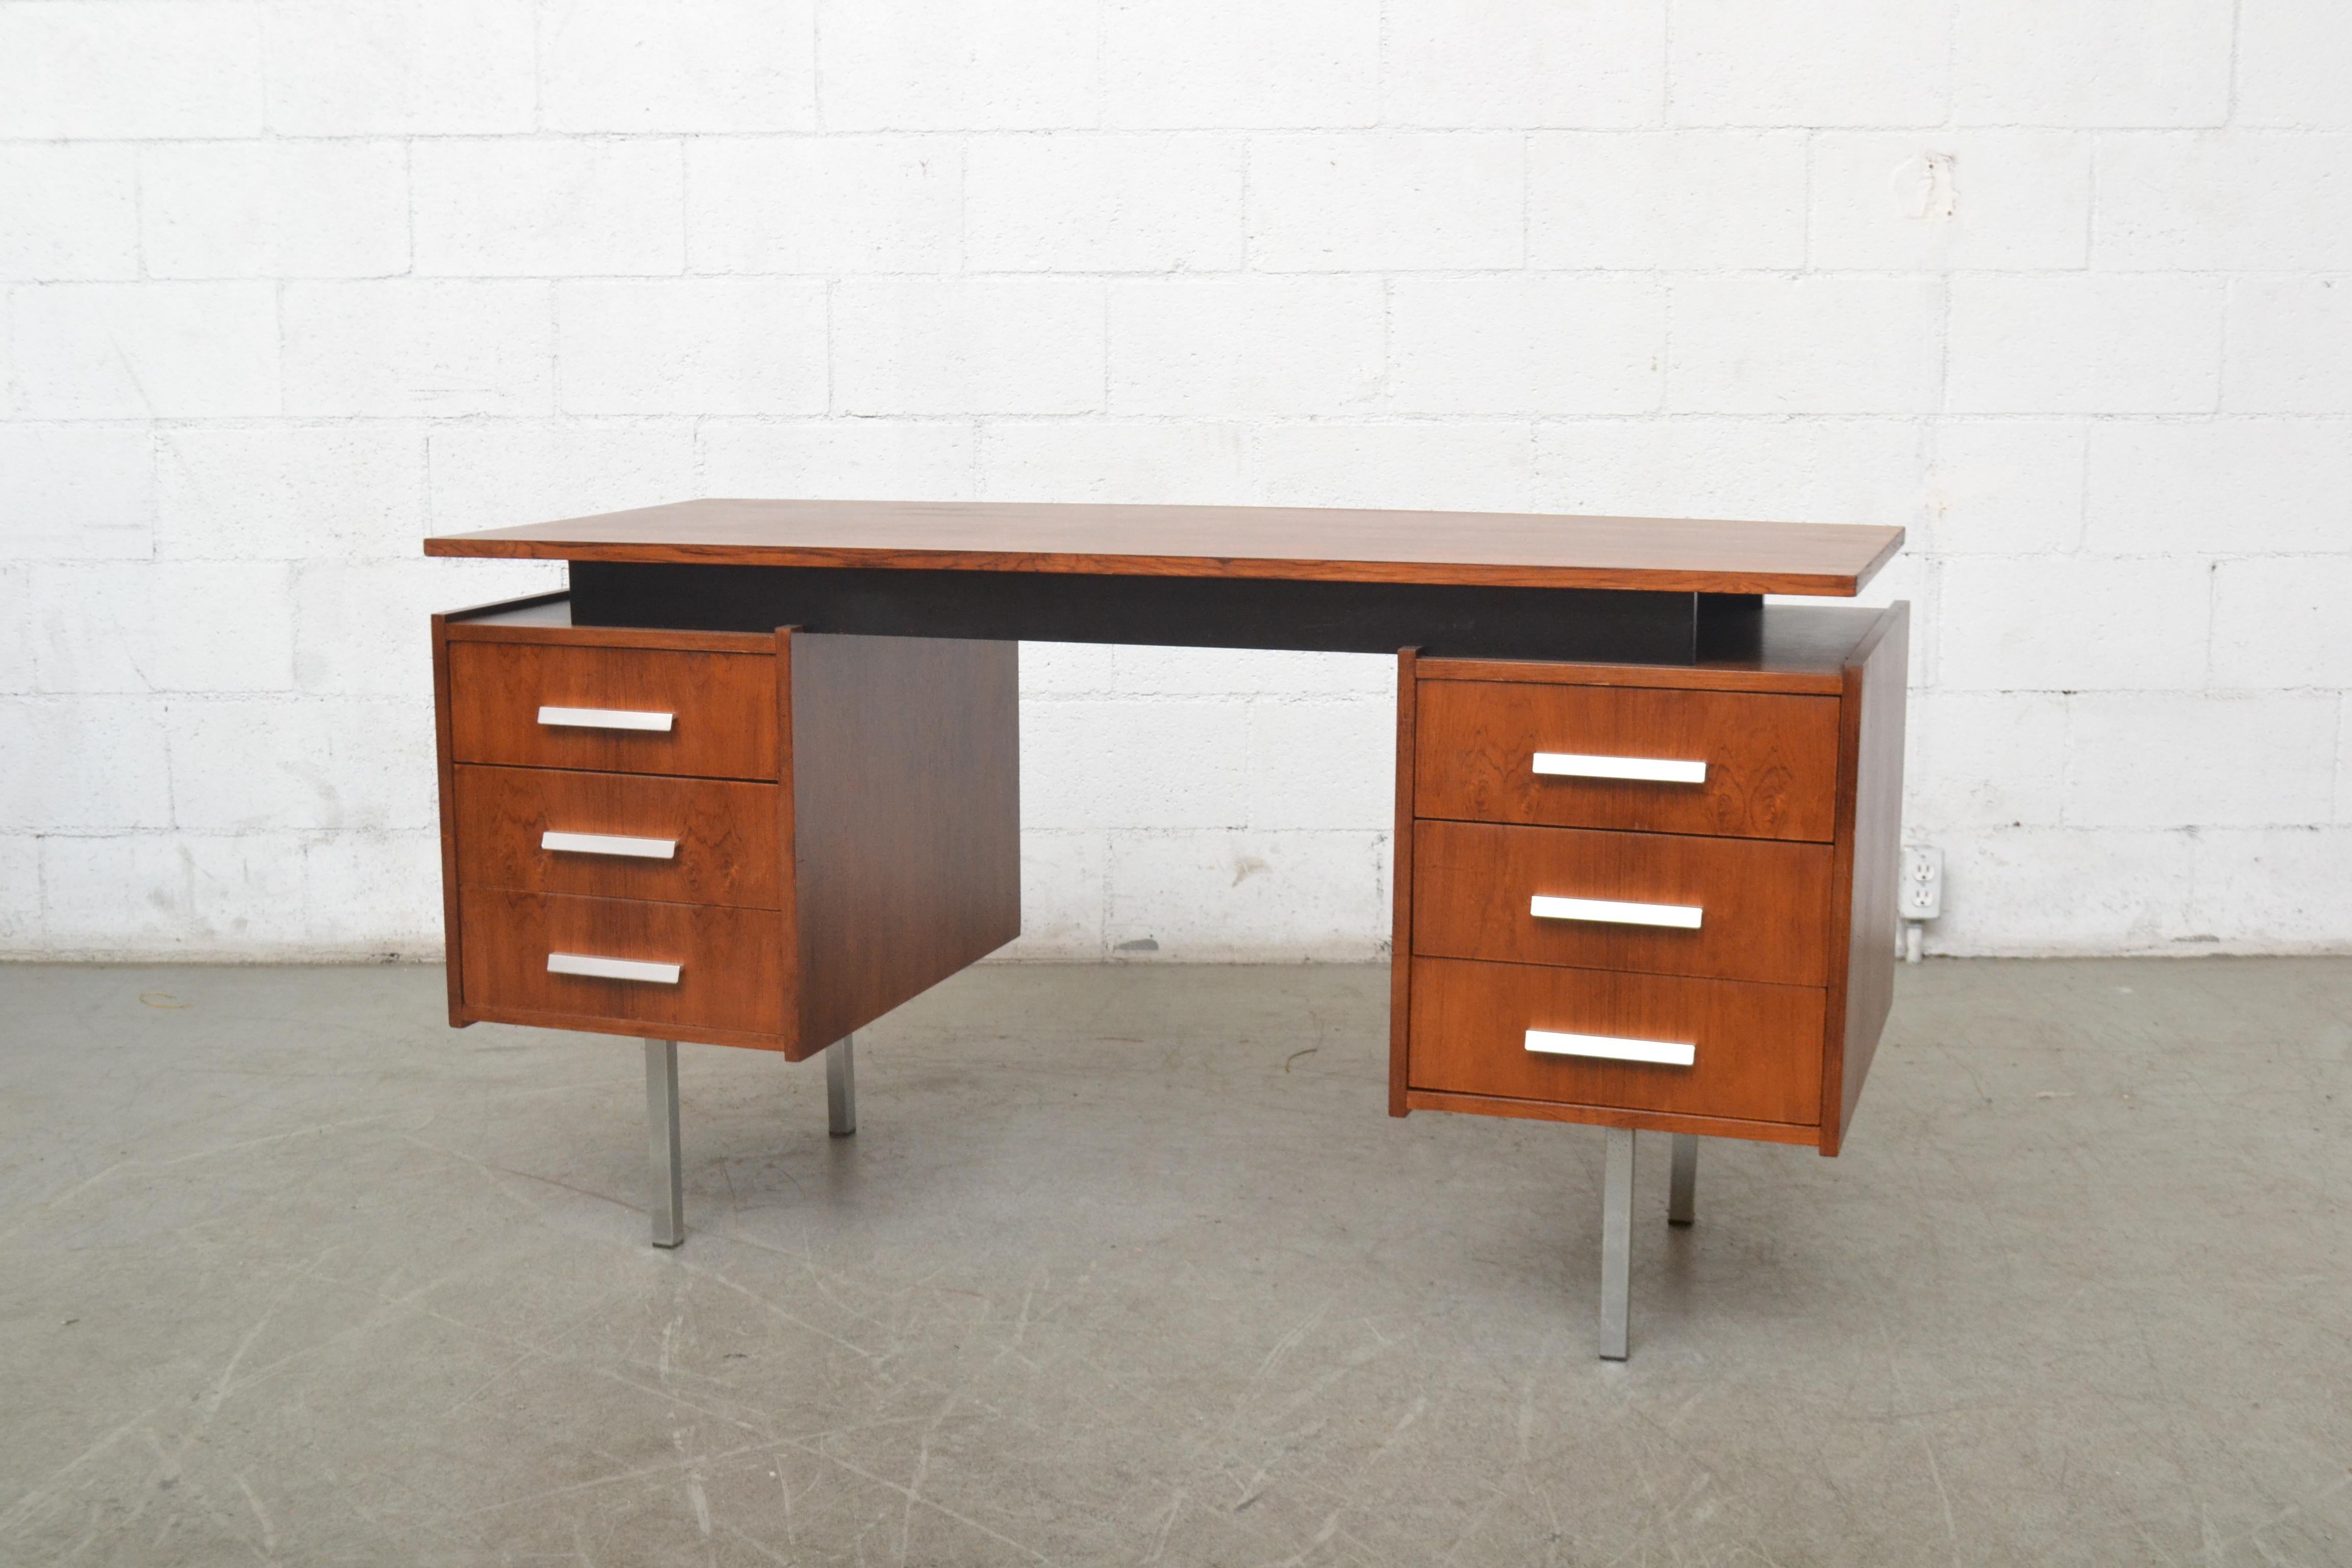 Midcentury office desk designed by Cees Braakman for Pastoe. Lightly refinished teak. Floating top with black painted wood riser. Three sliding drawers on each side with aluminum pulls and chrome legs.